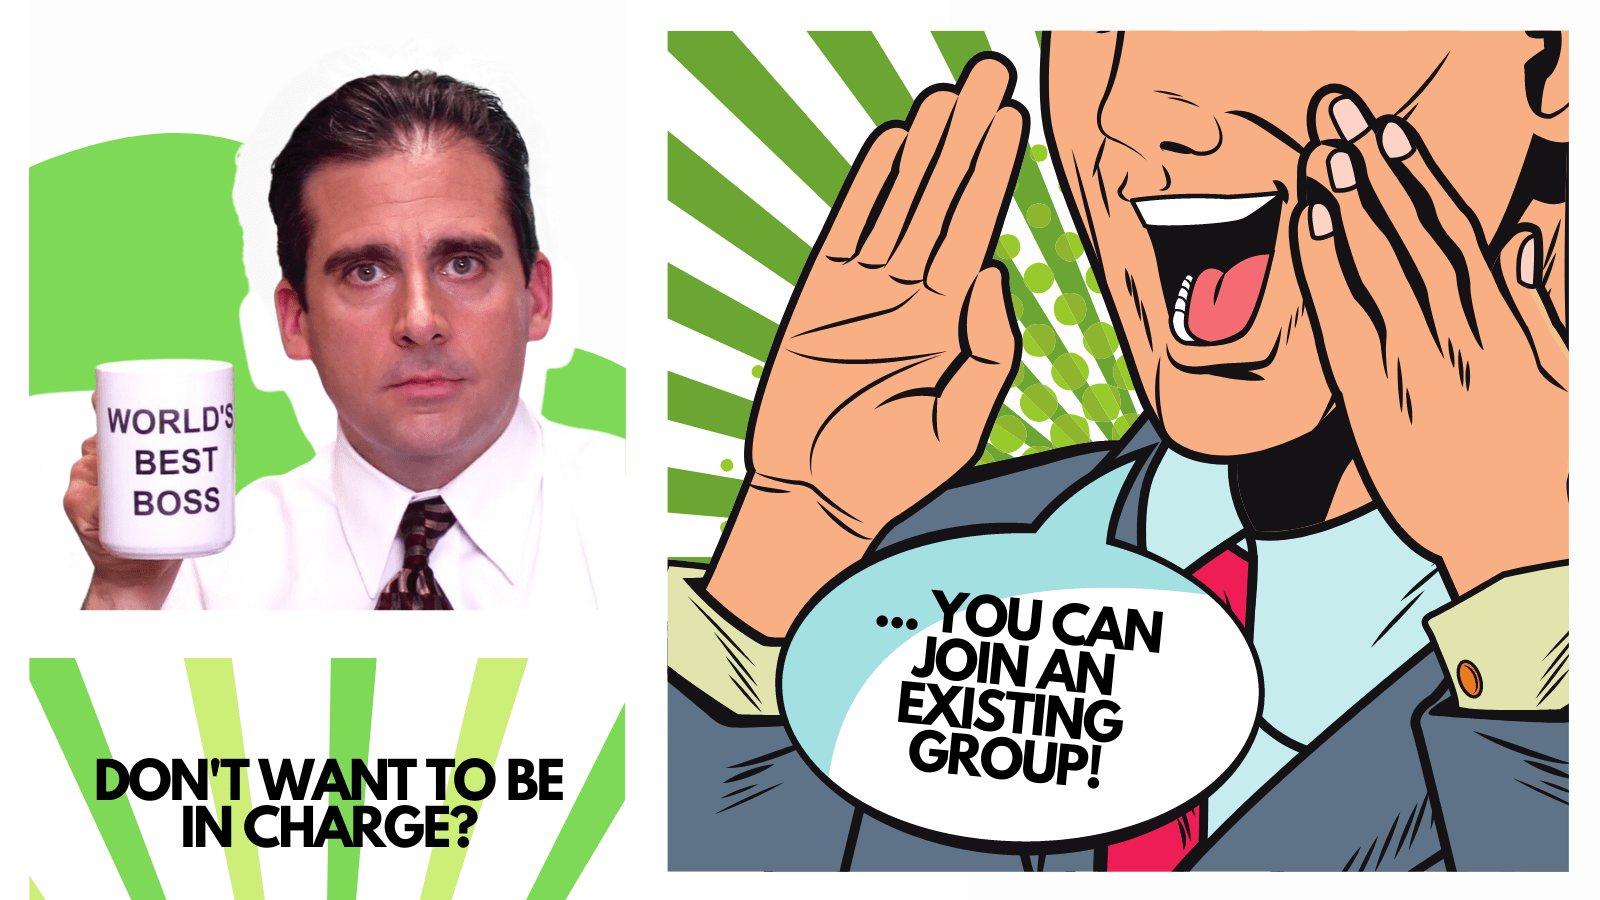 The Office's Michael Scott, helps reiterate that you can join a group, even if you do not want to be in charge one.